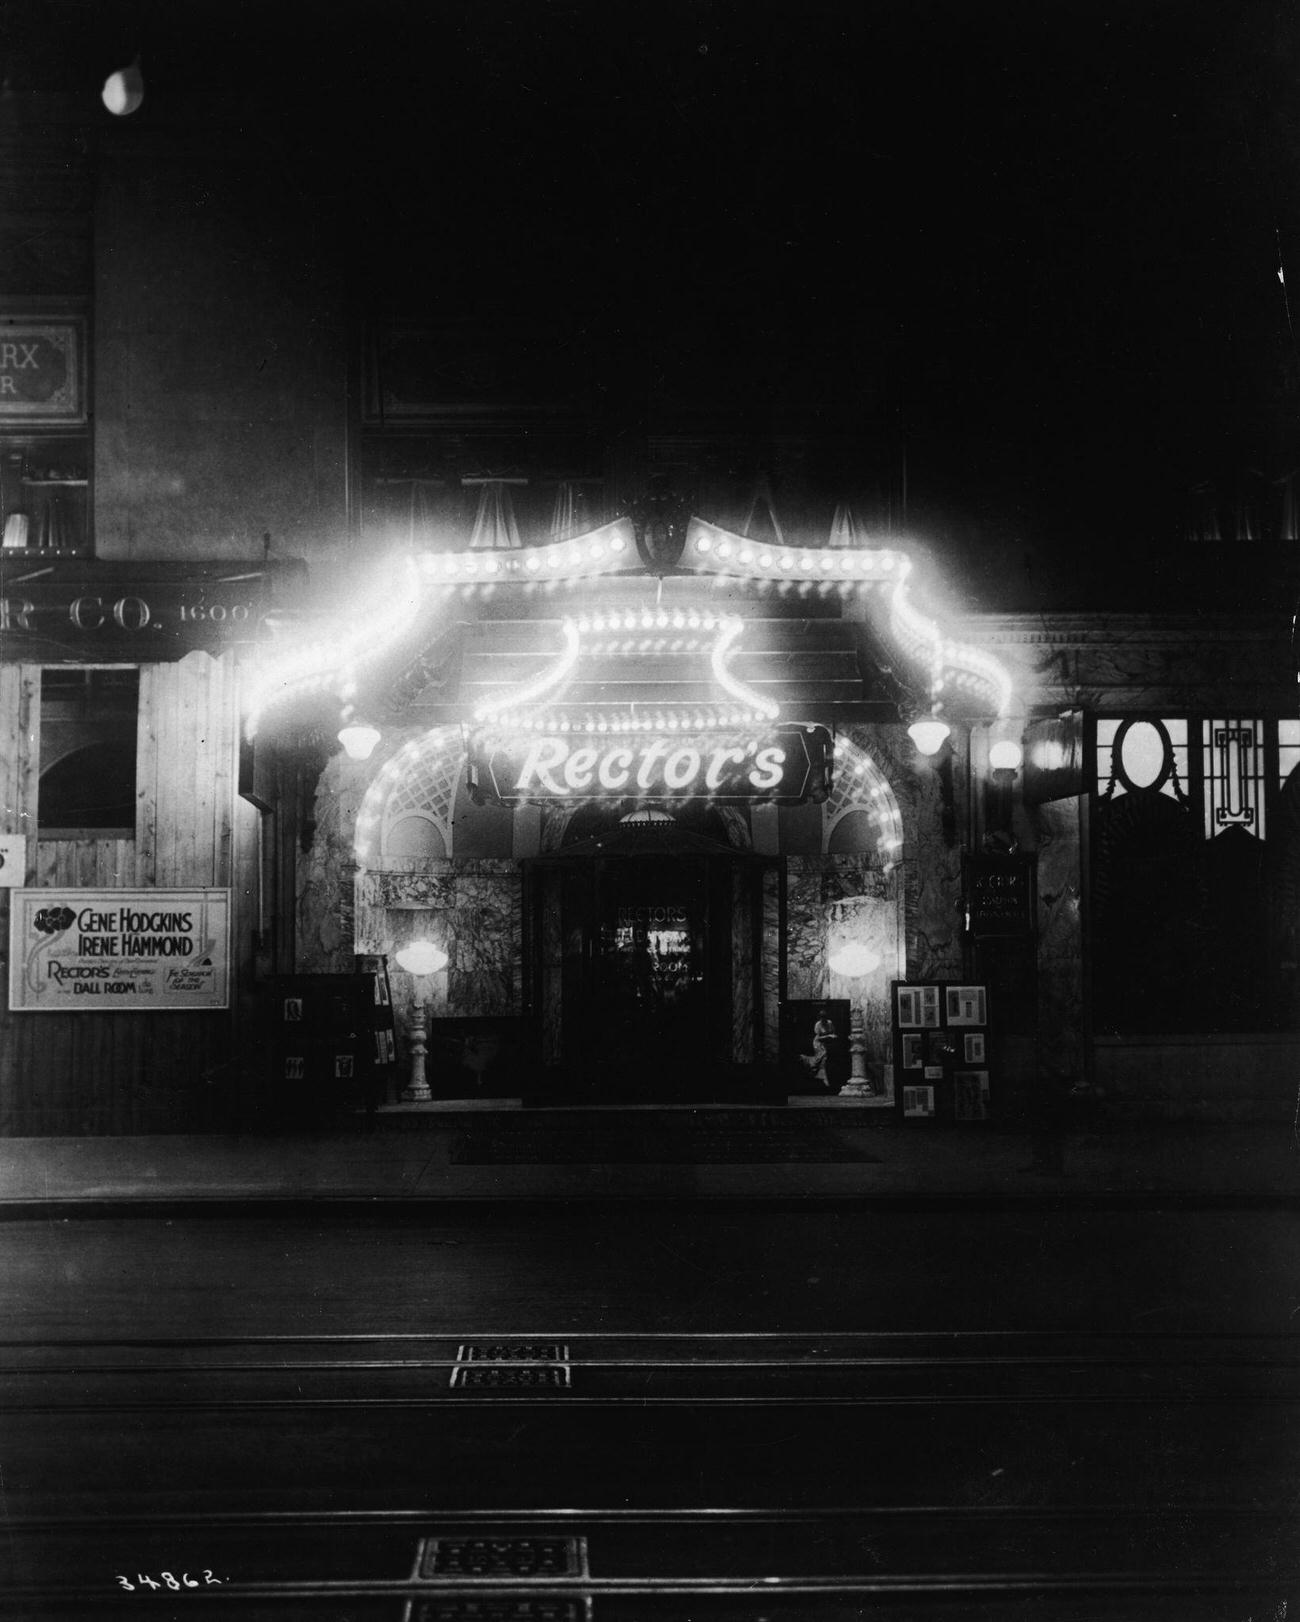 Rector'S Restaurant With Its Entrance Illuminated At Night, On 42Nd Street In New York City, 1900S